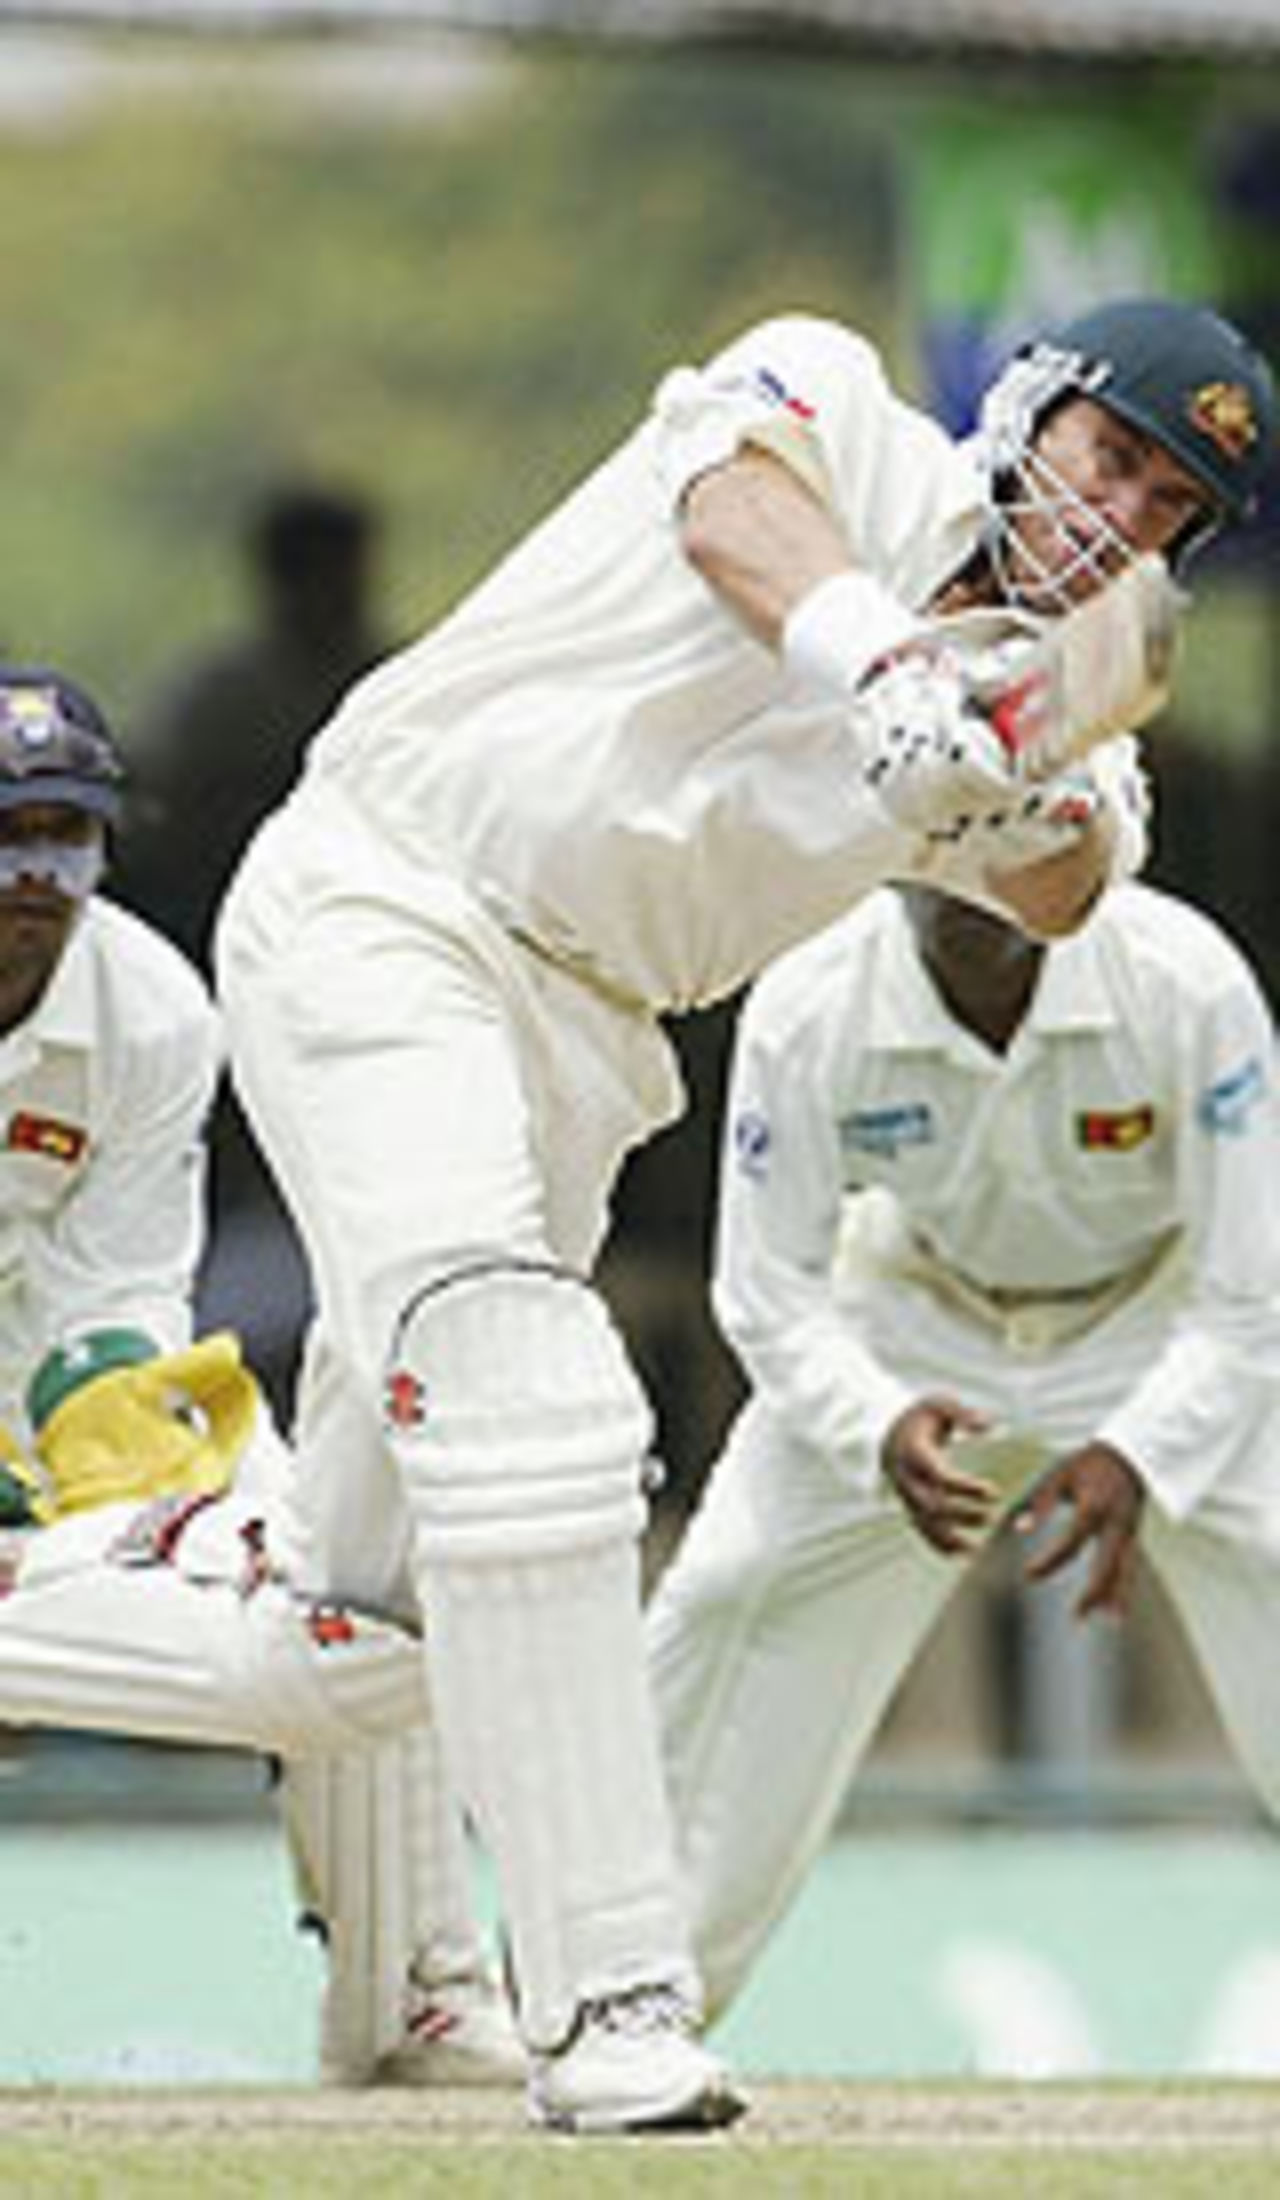 Matthew Hayden hits out during his fighting knock of 54, Sri Lanka v Australia, 2nd Test, Kandy, 1st day, March 16, 2004